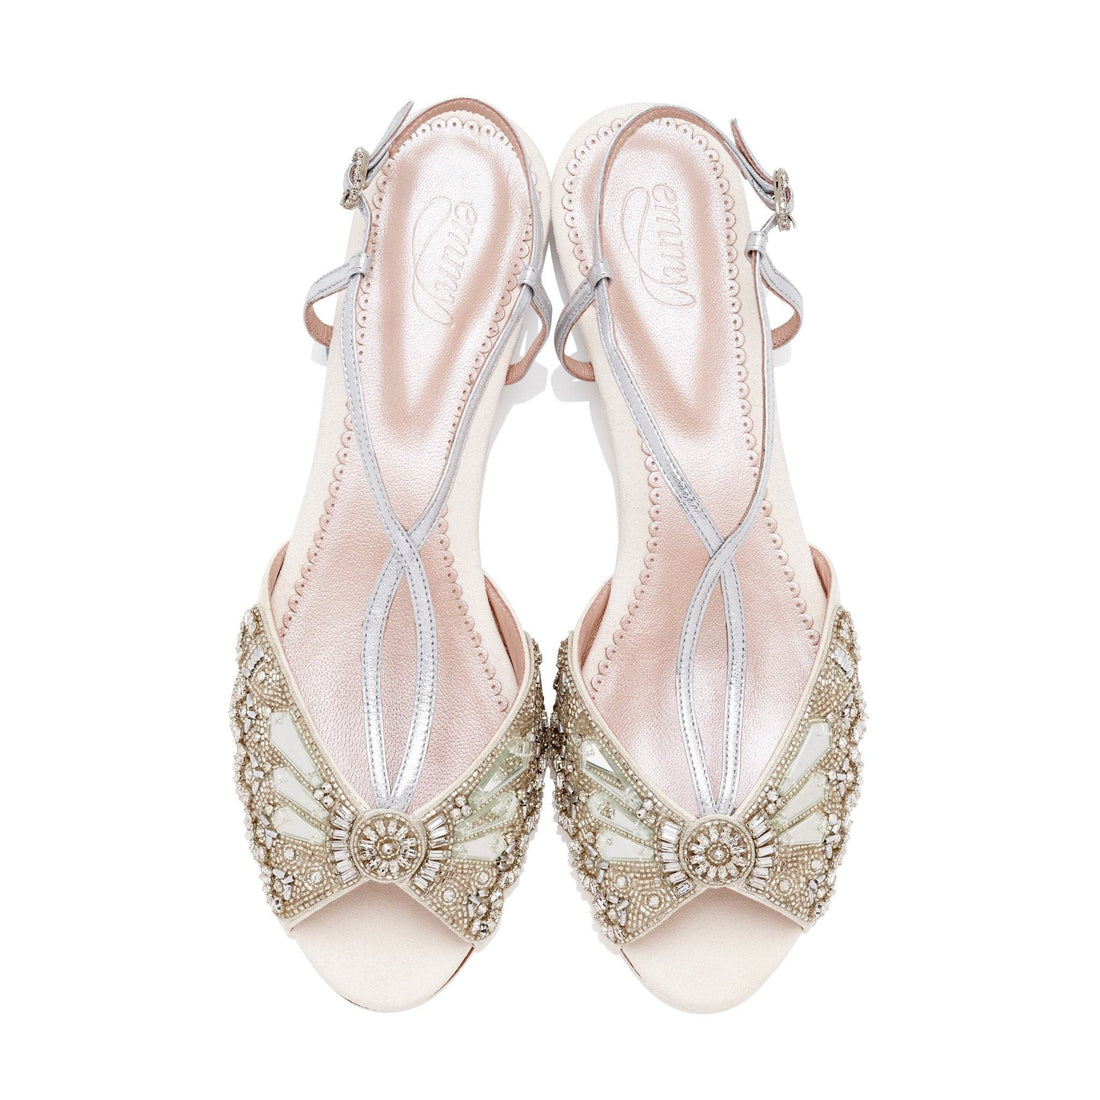 Jude Silver Bridal Shoe Ivory Flat Sparkly Sandals